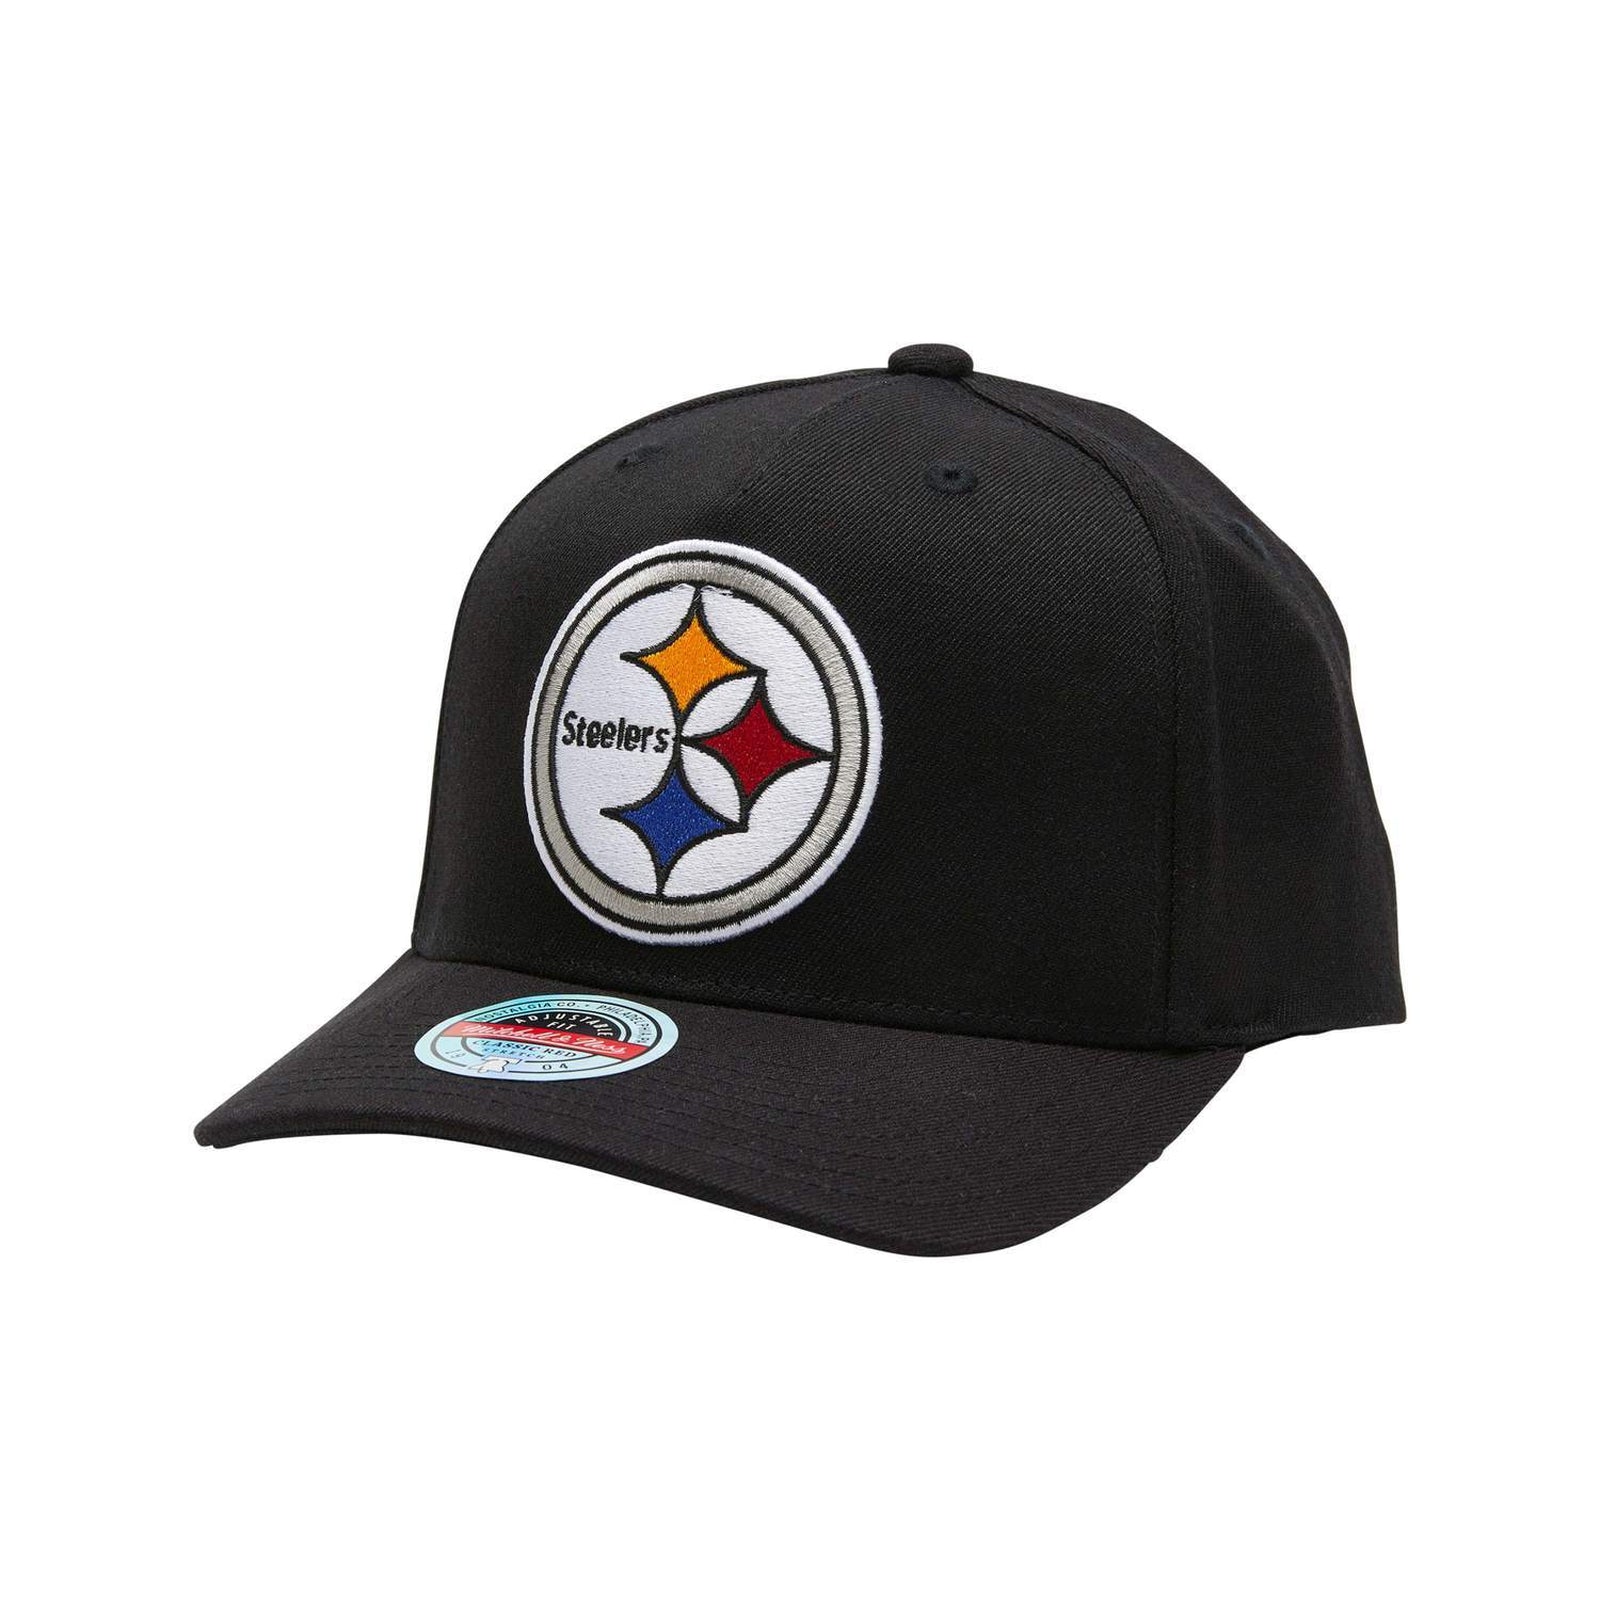 Pittsburgh Steelers Classic Redline Snapback 5 Panel Cap by Mitchell & Ness